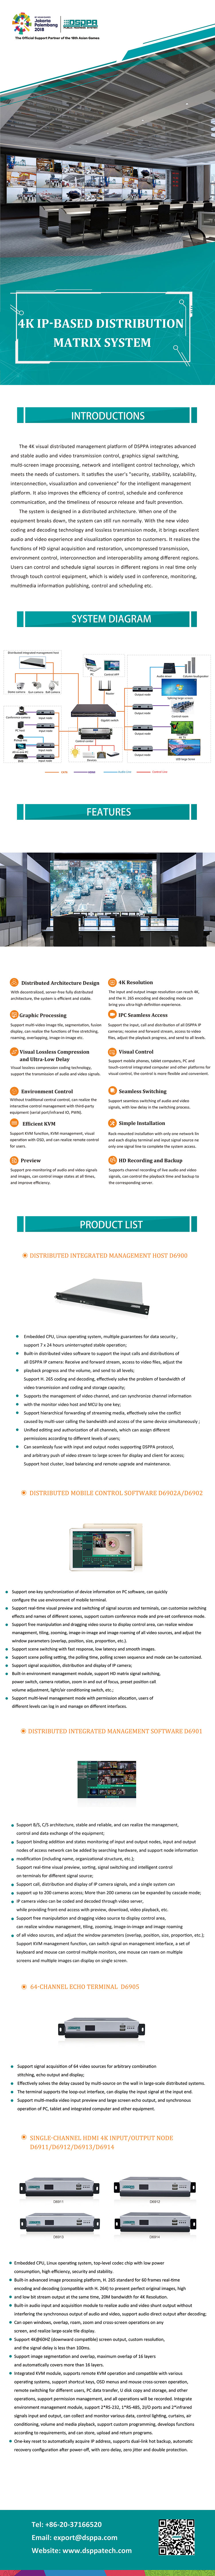 D6900 Distributed Integrated Management Center